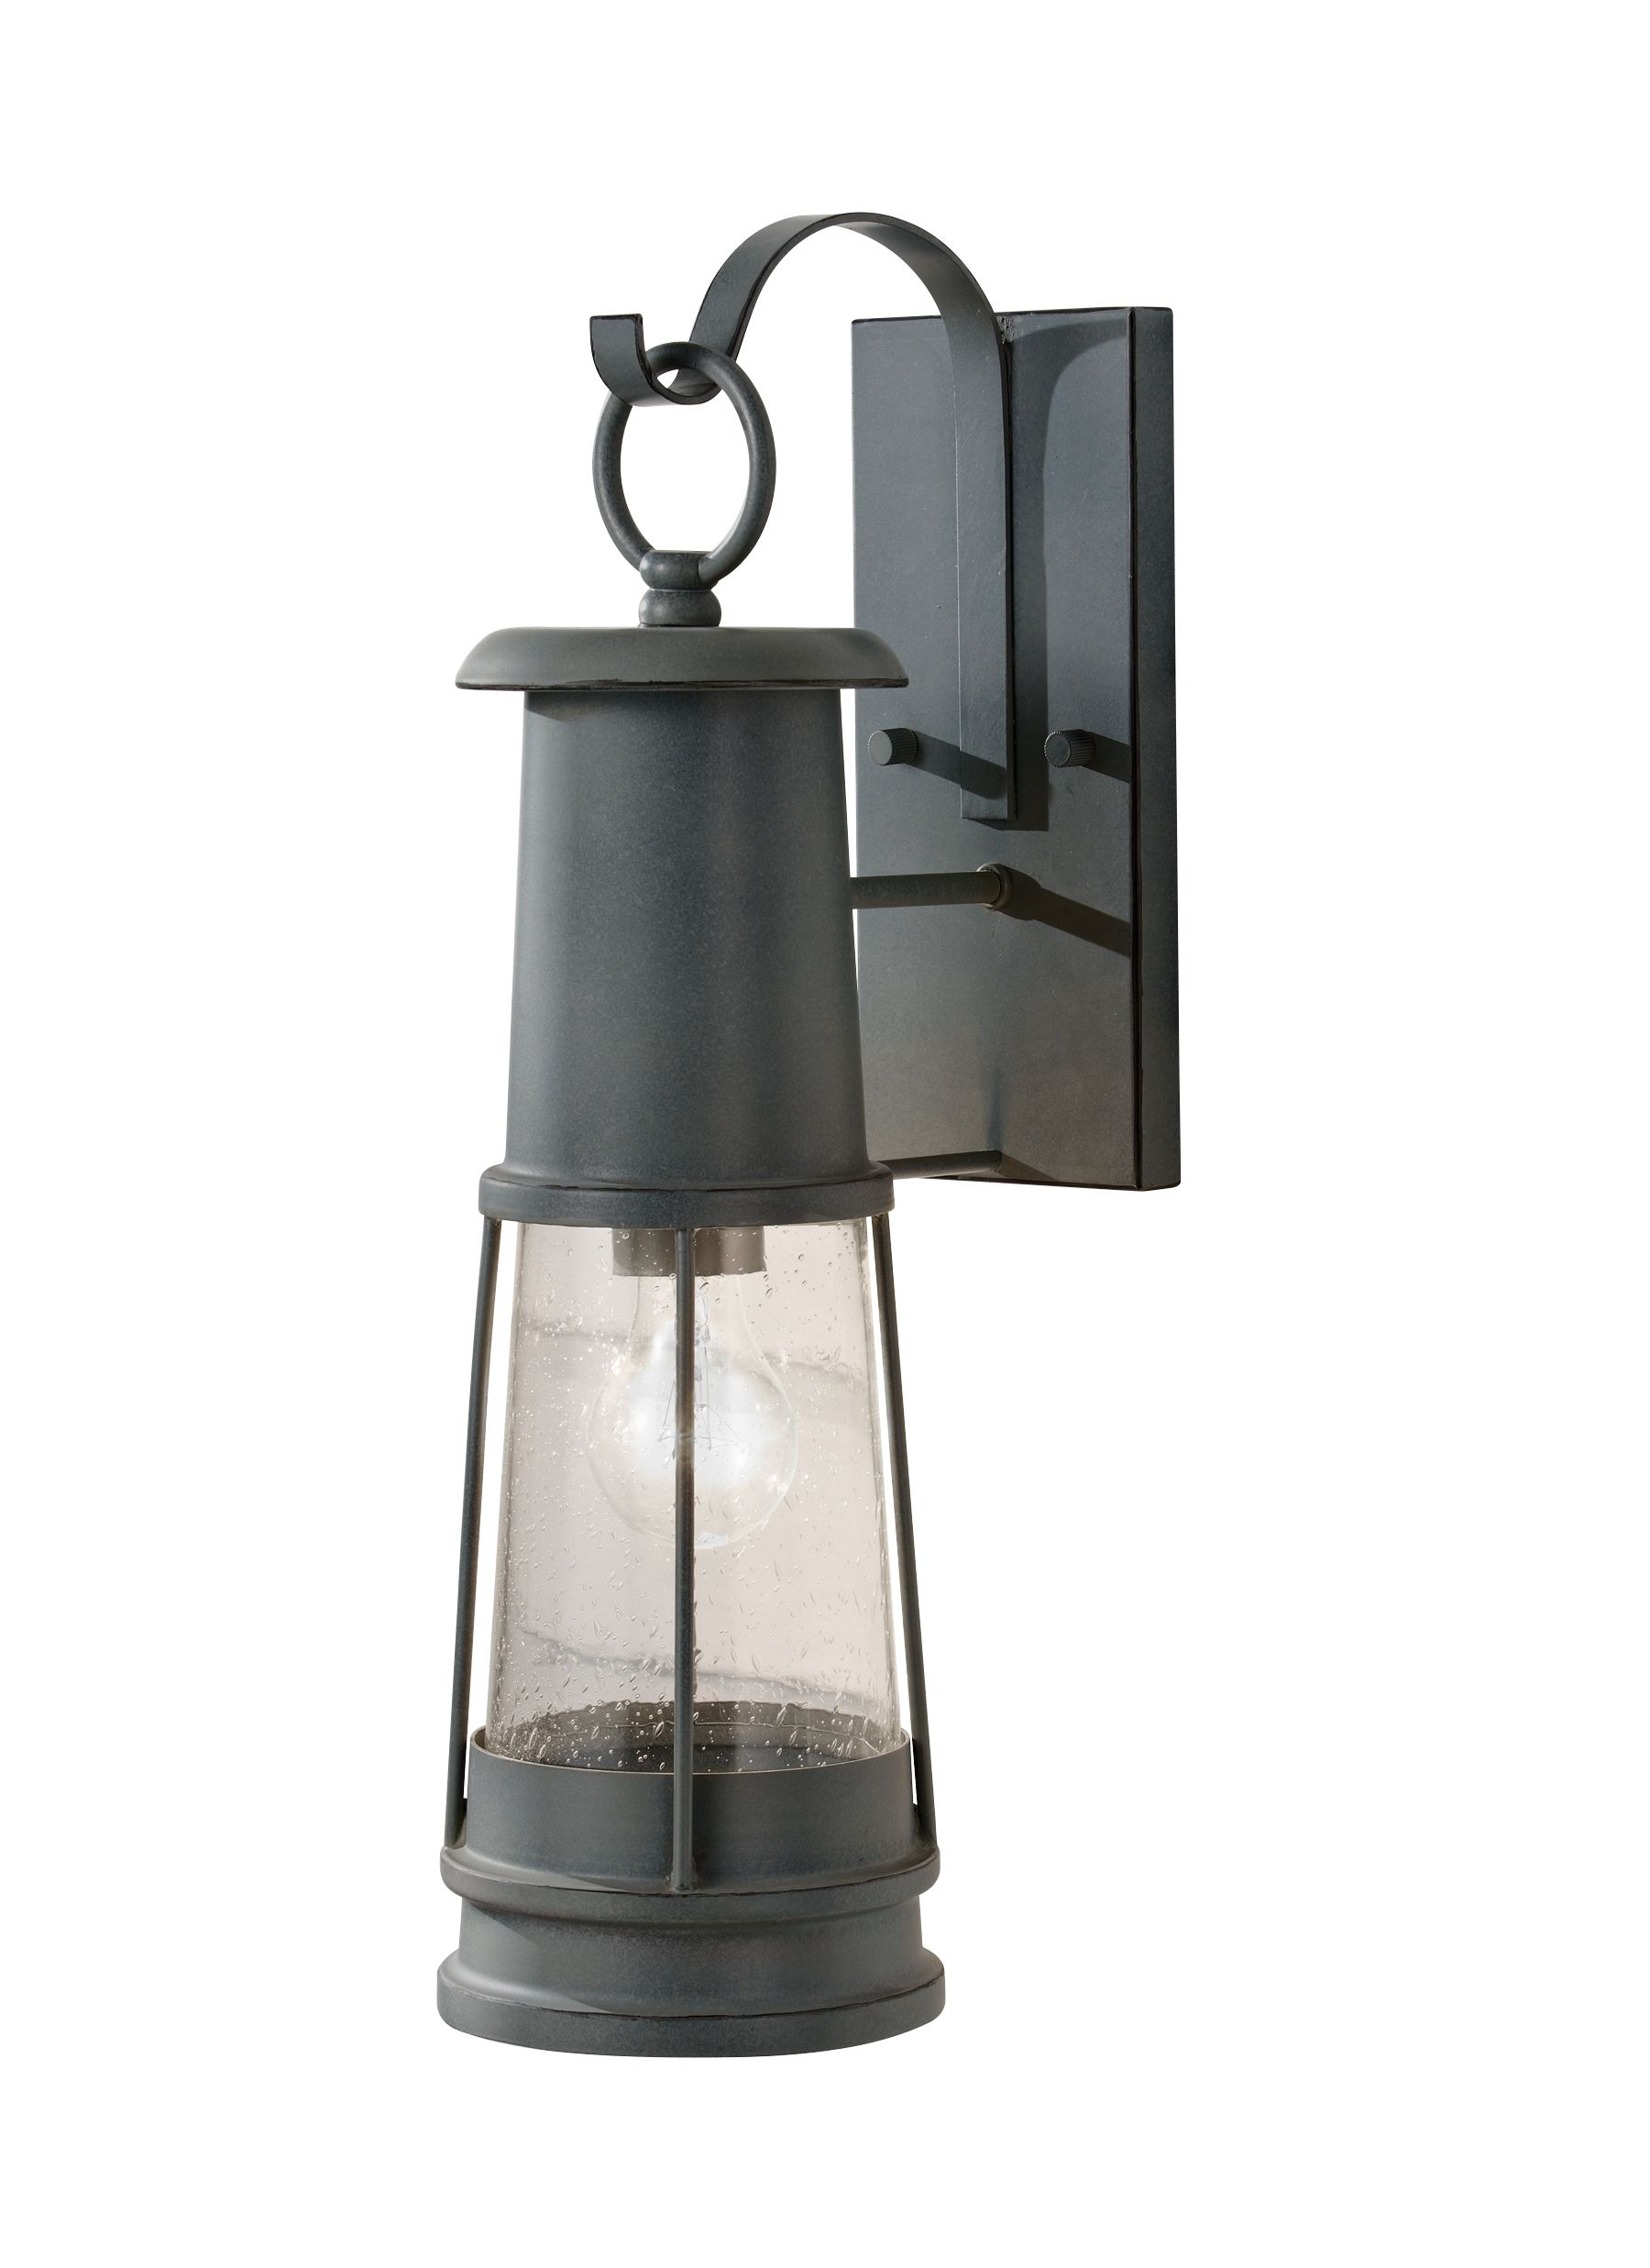 Ol8101stc,1 Light Outdoor Lantern,storm Cloud Within Outdoor Storm Lanterns (View 9 of 20)